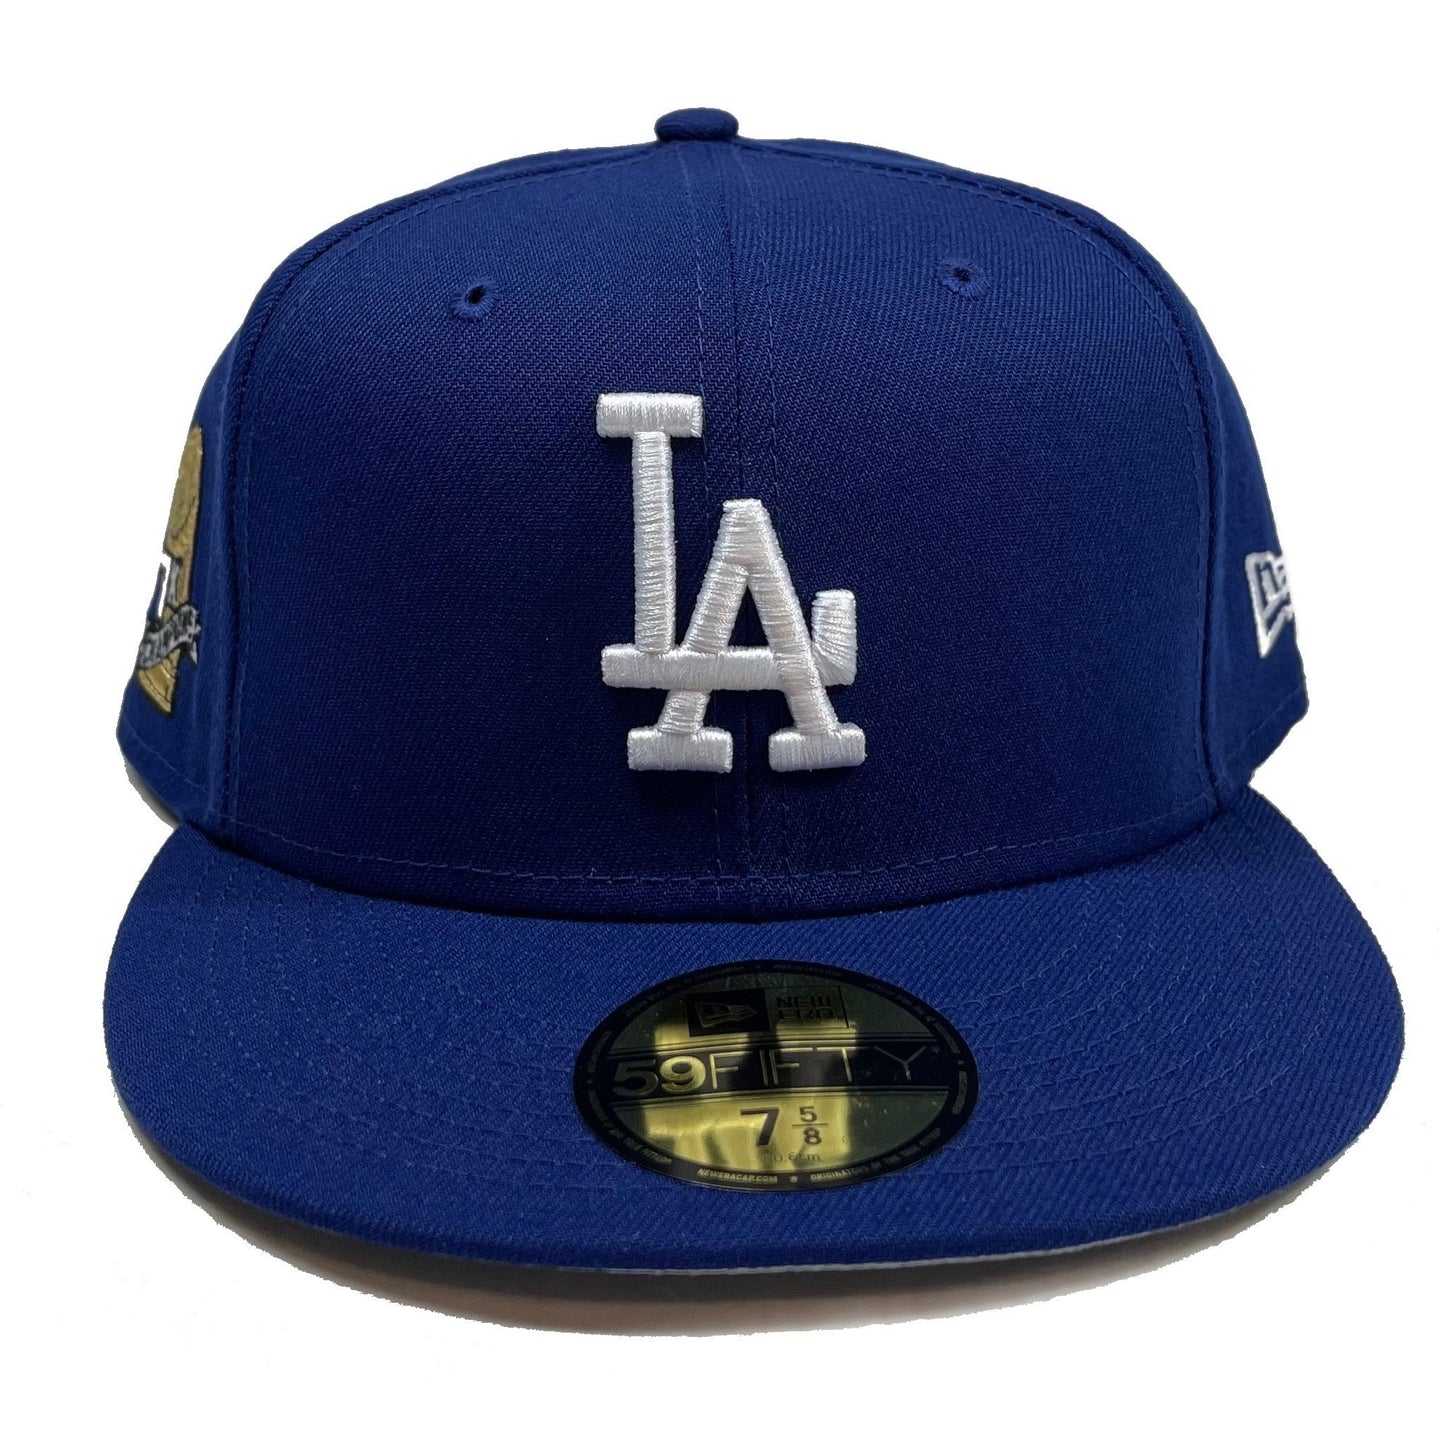 Los Angeles Dodgers 7x Champions (Blue) Snapback/Fitted